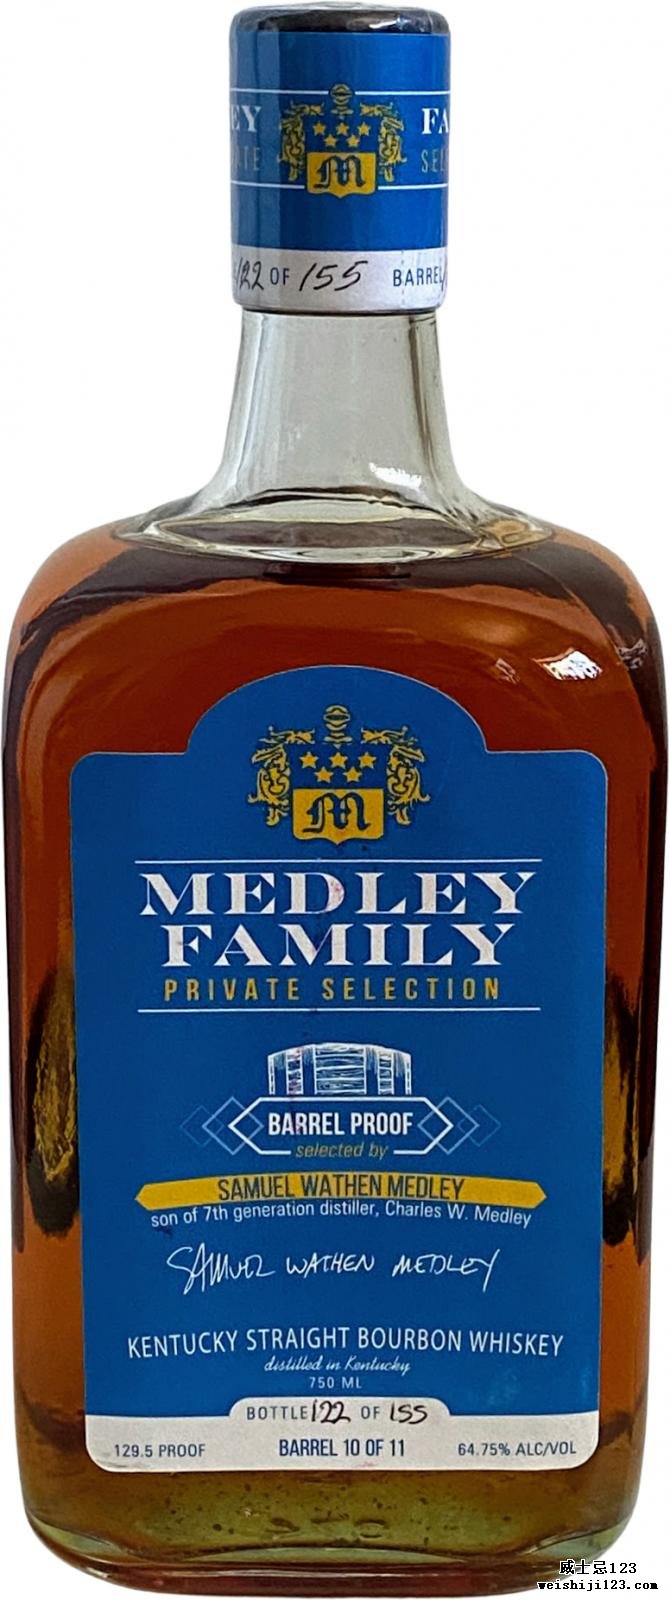 Medley Family Private Selection